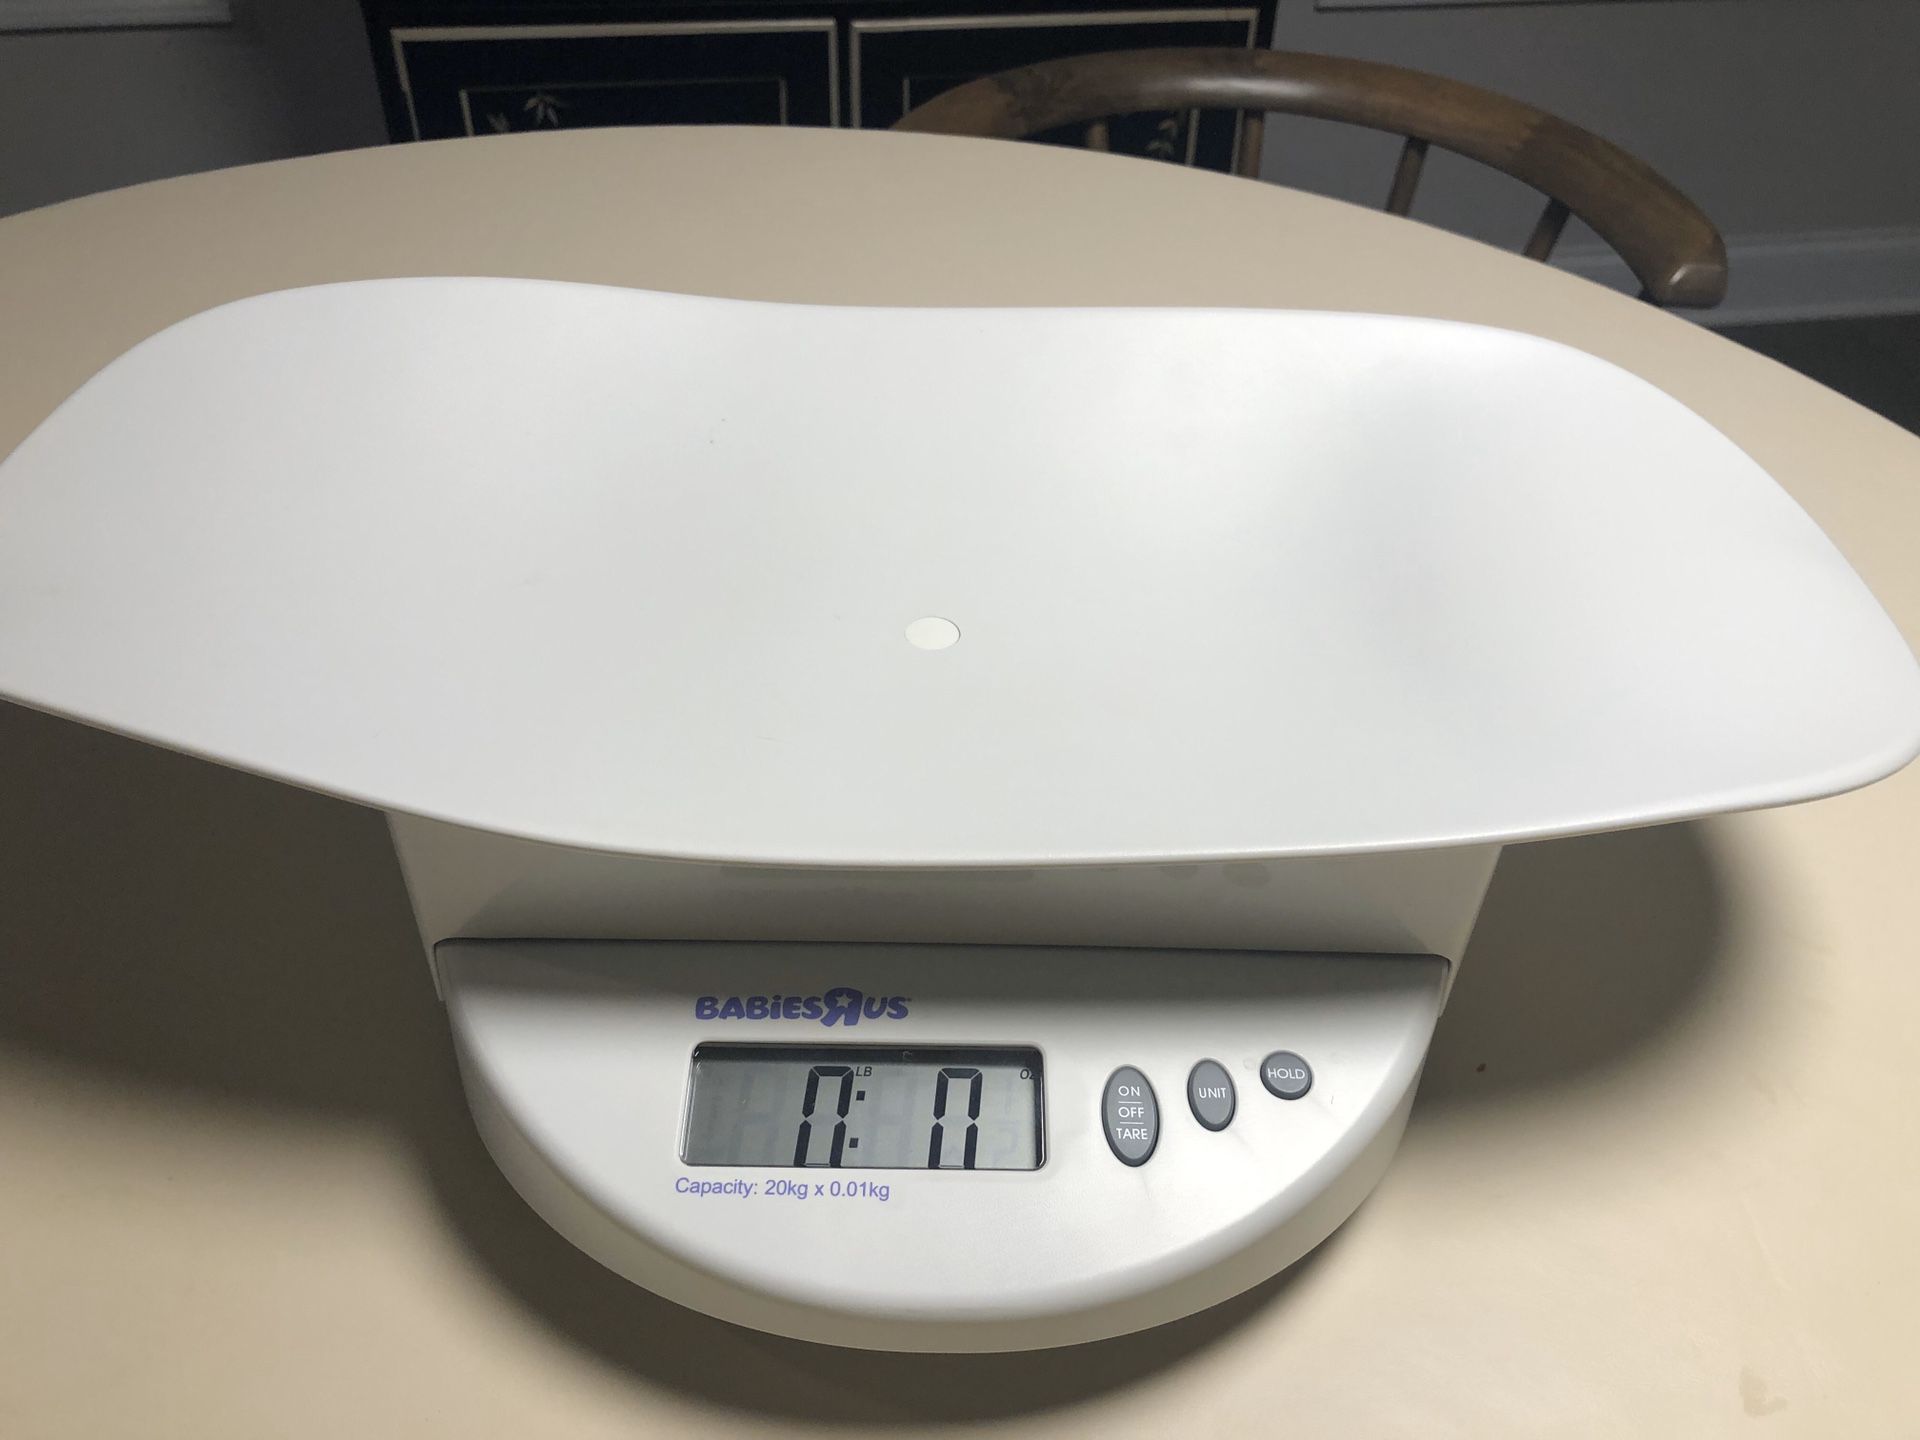 Offers on baby scales - Cheap scales for babies